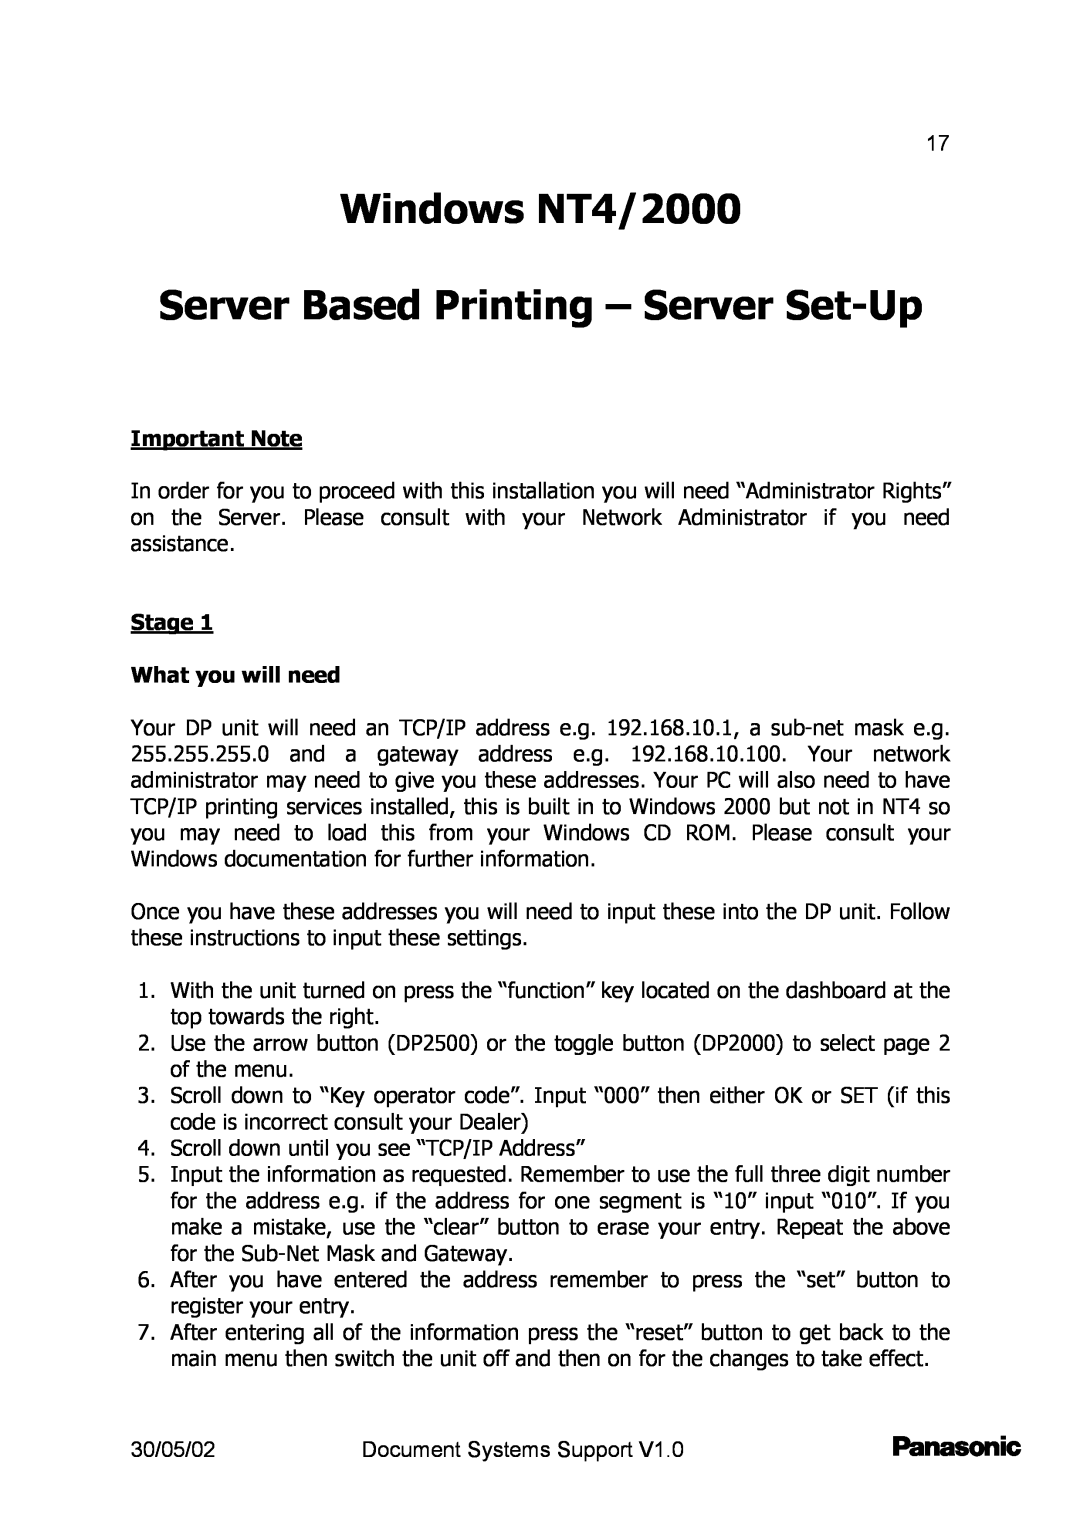 Barco DP2000/2500 Windows NT4/2000 Server Based Printing - Server Set-Up, Important Note, Stage What you will need 